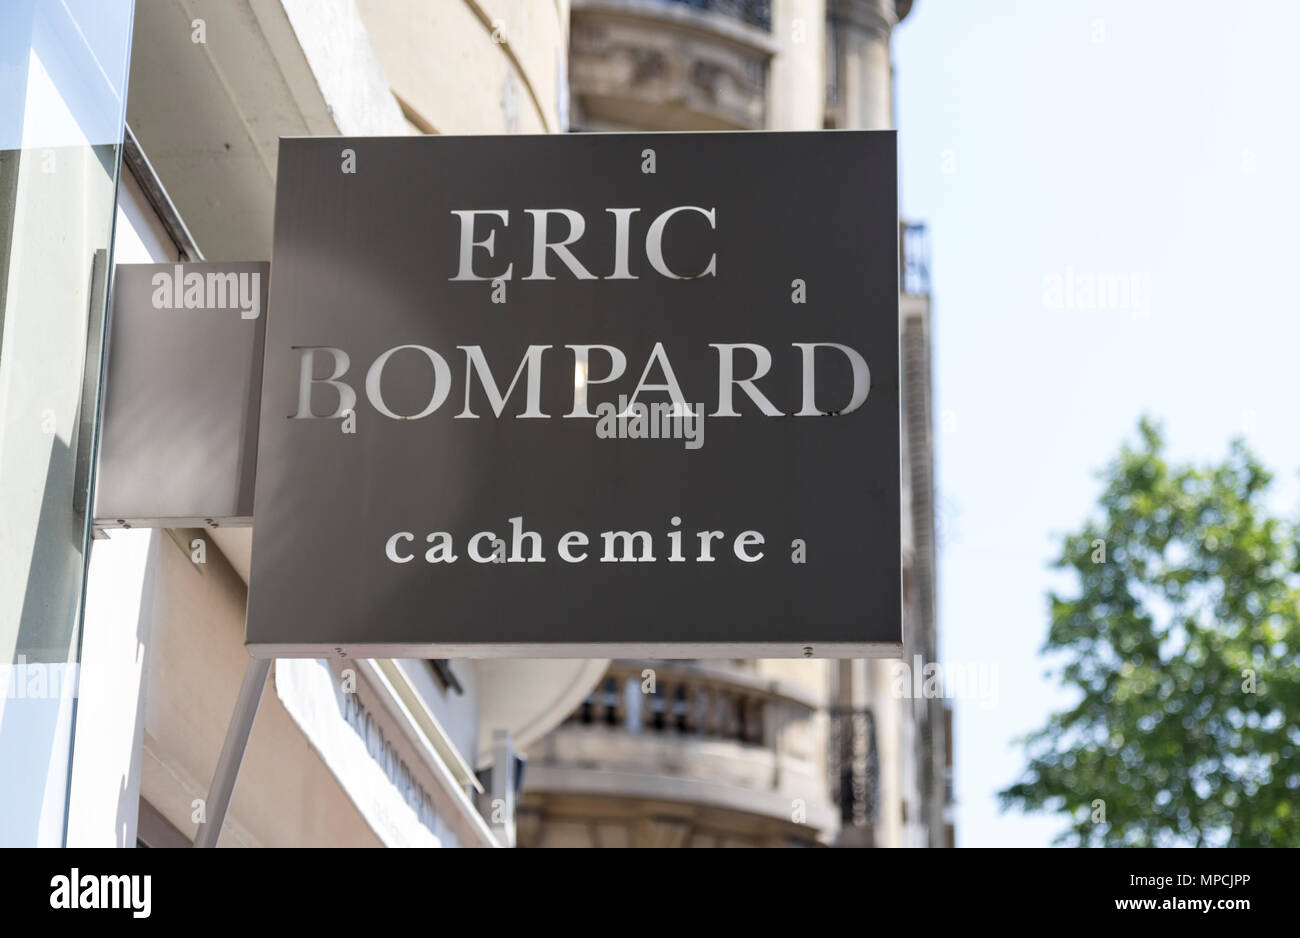 Erci Bompard, french cashmere outside retail sign Stock Photo